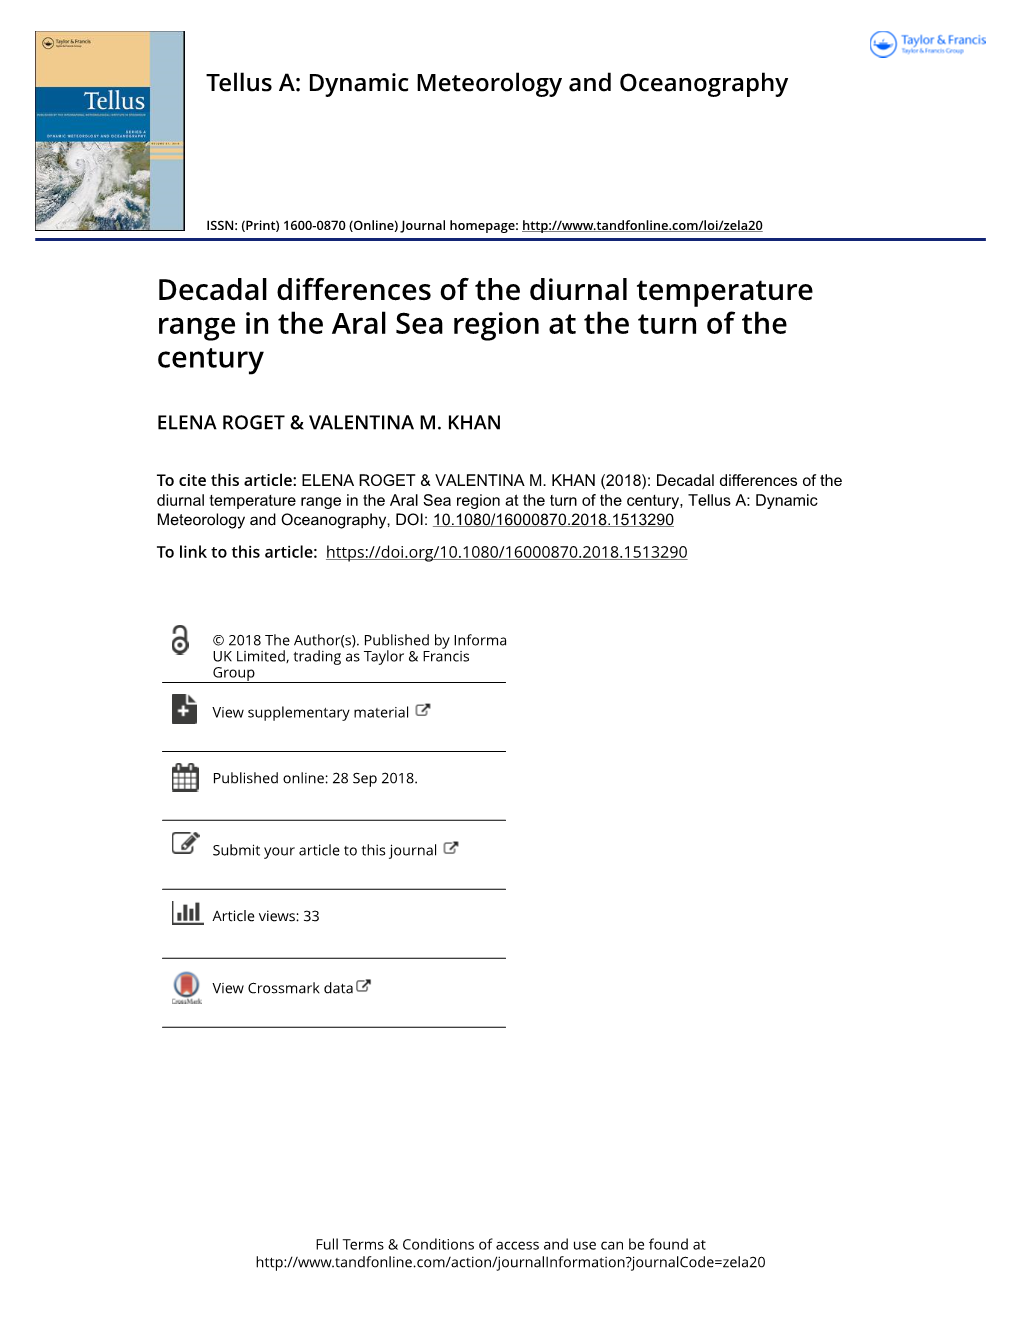 Decadal Differences of the Diurnal Temperature Range in the Aral Sea Region at the Turn of the Century